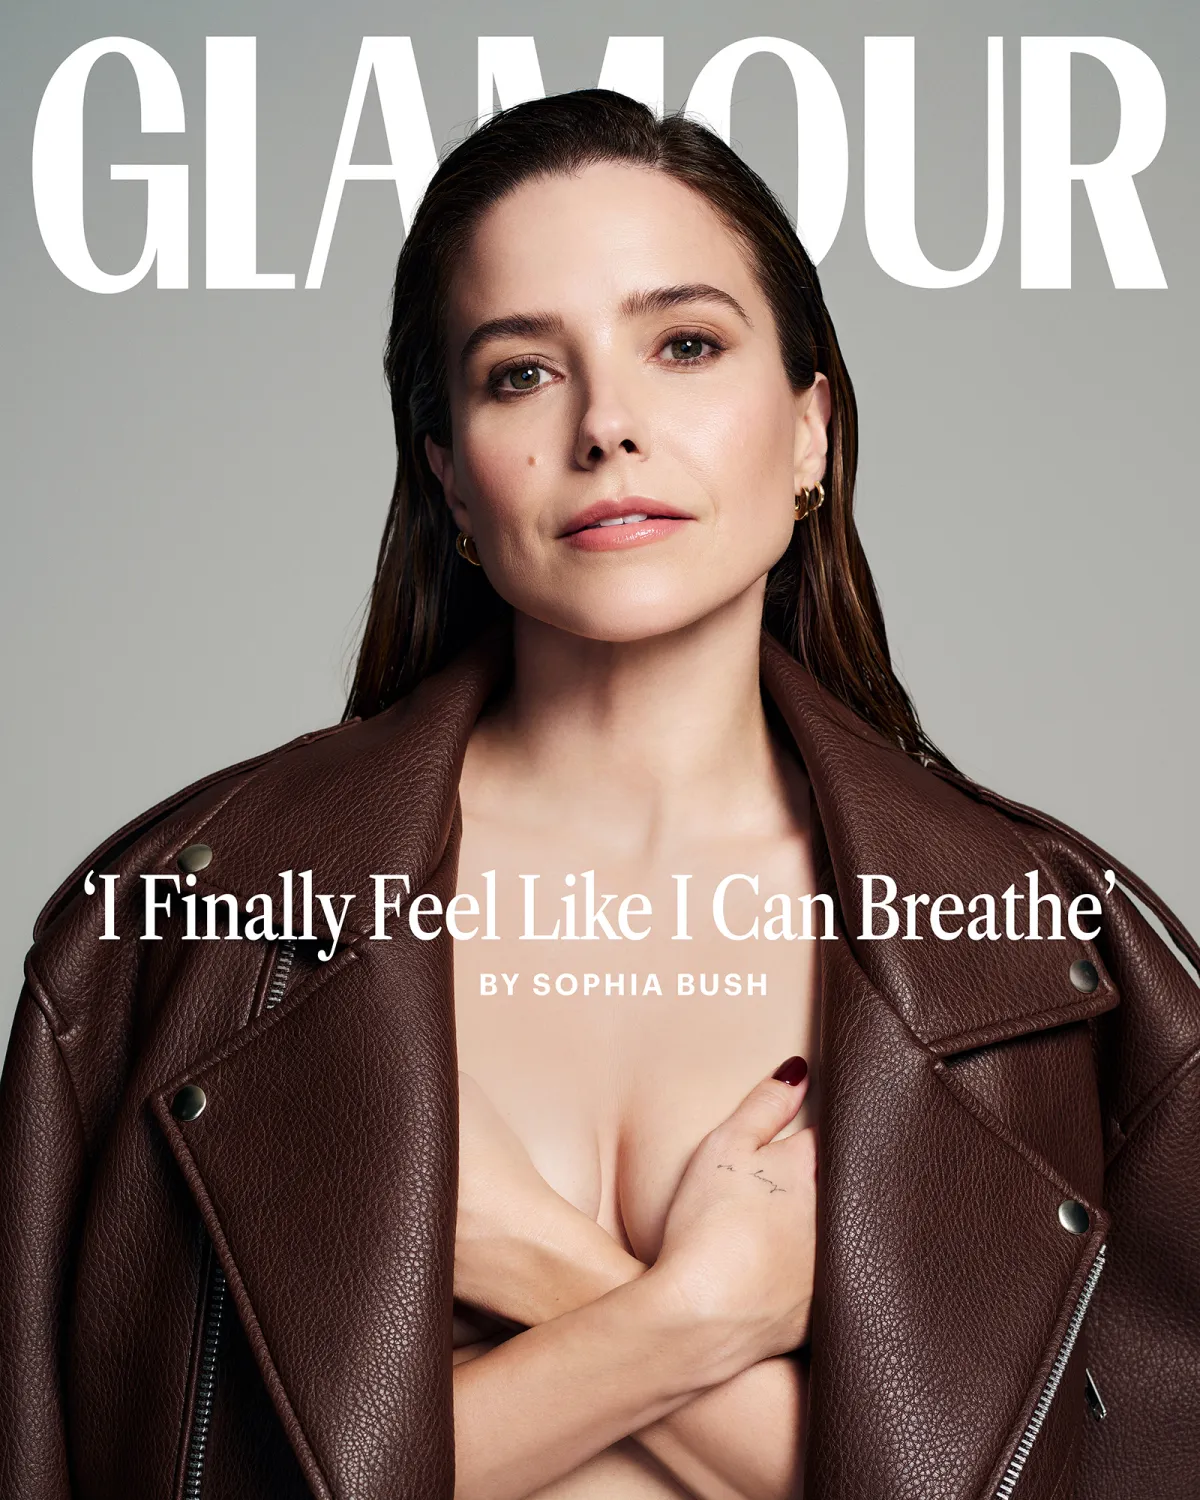 Sophia Bush Reflects on Marriage Struggles and Personal Growth in an Interview